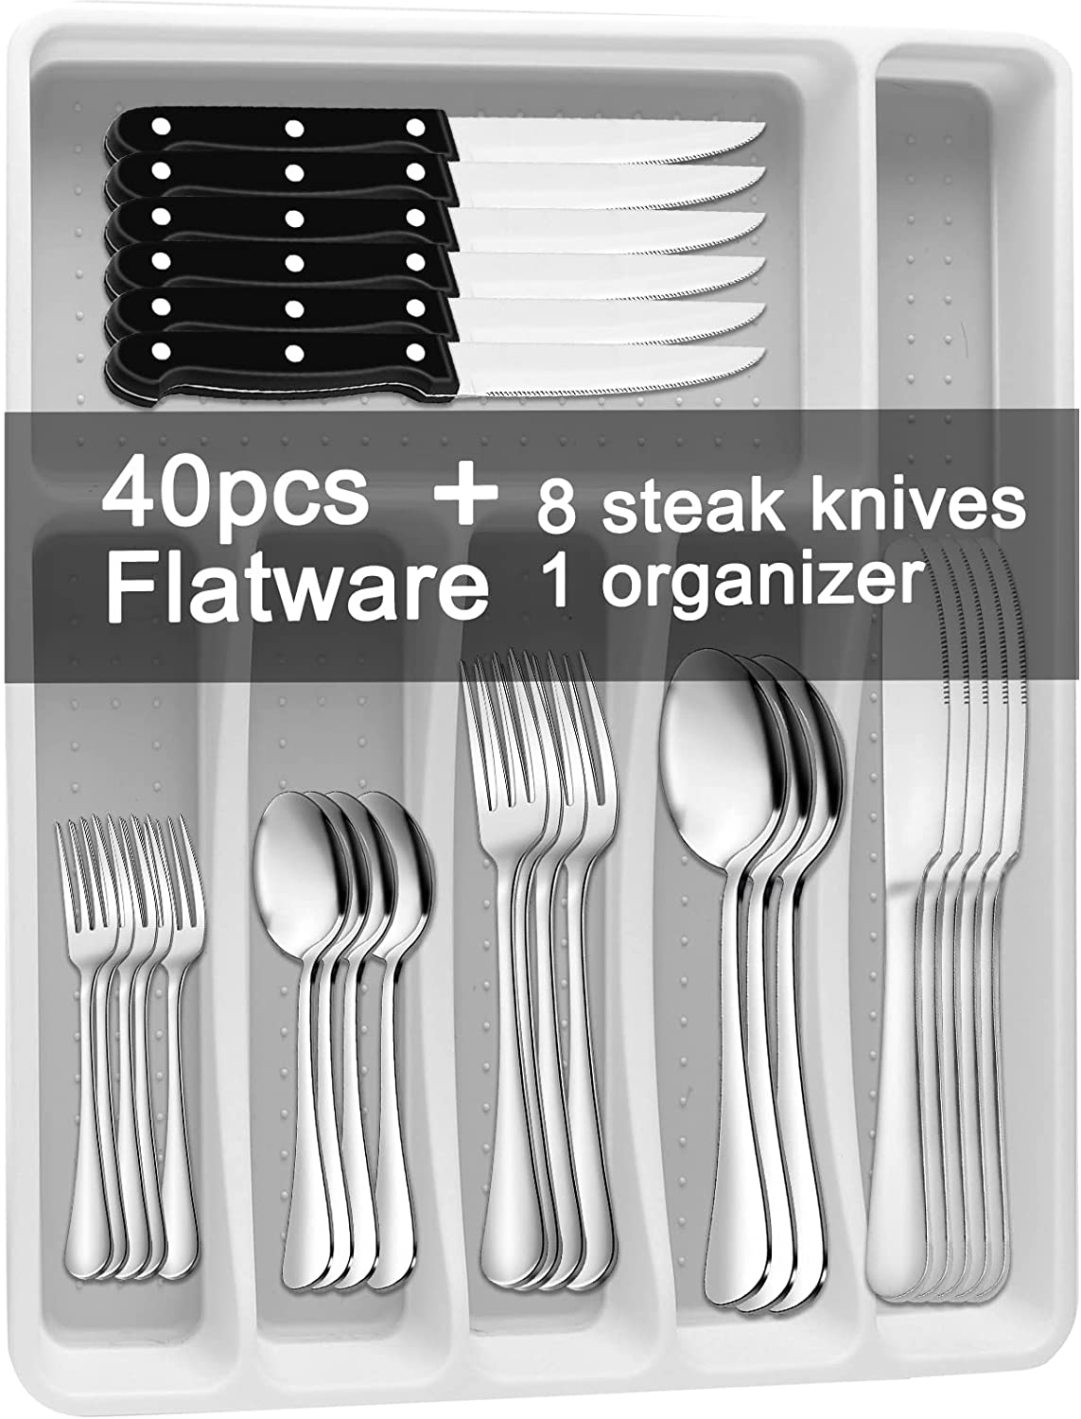 24 Piece Silverware Set with Steak Knives, Stainless Steel Flatware Set,  Cutlery Set Service for 4, Mirror Polished Utensils Set, Forks and Spoons